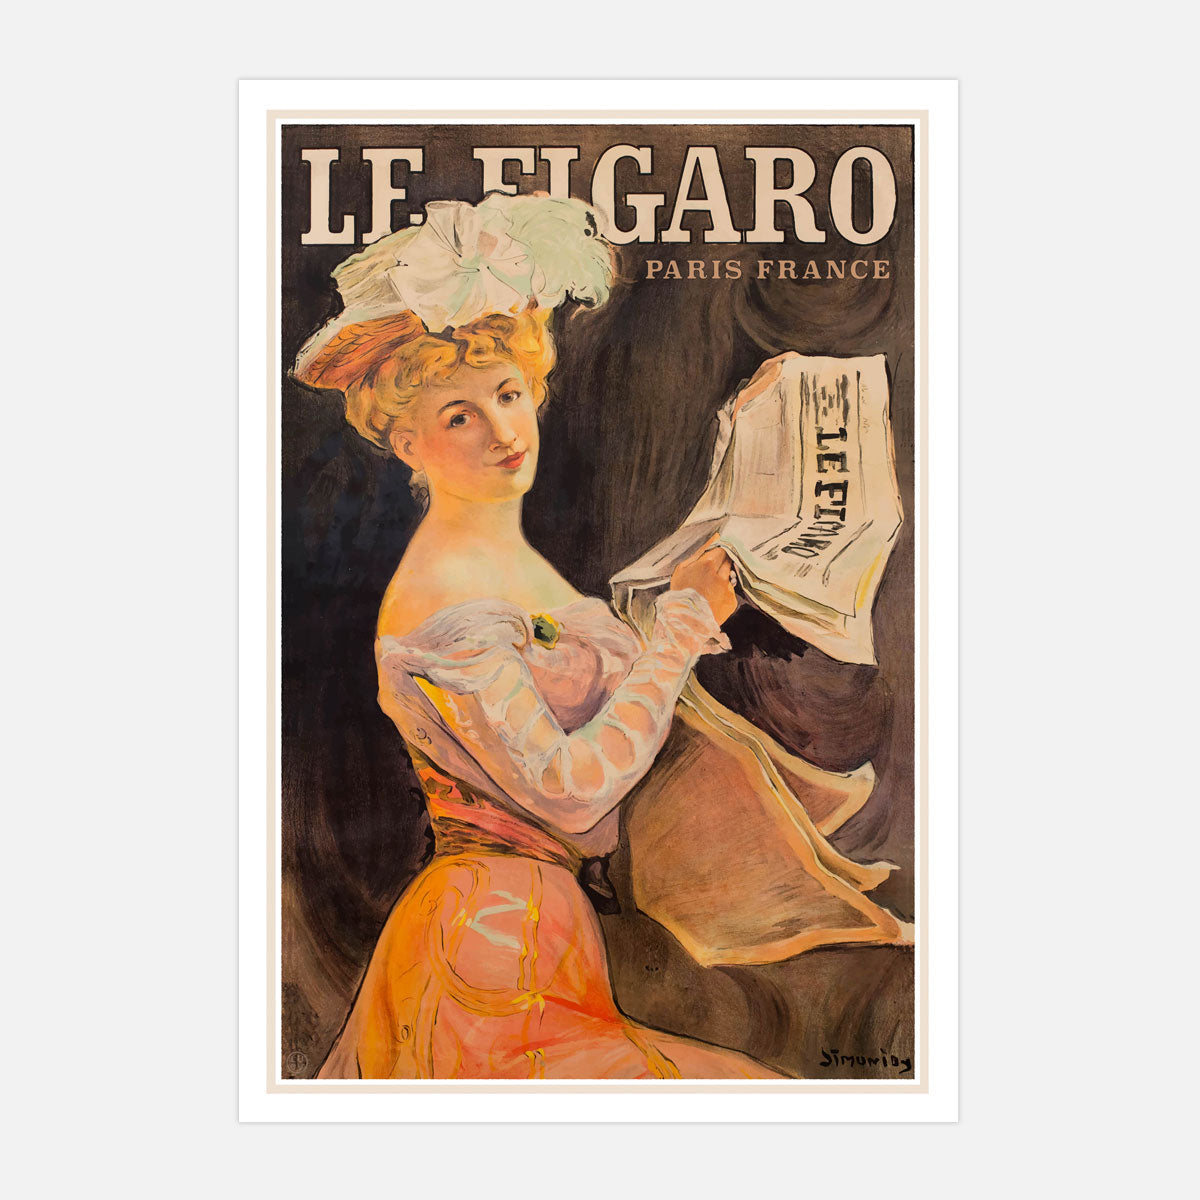 Le Figaro France reto vintage advertising print from Places We Luv